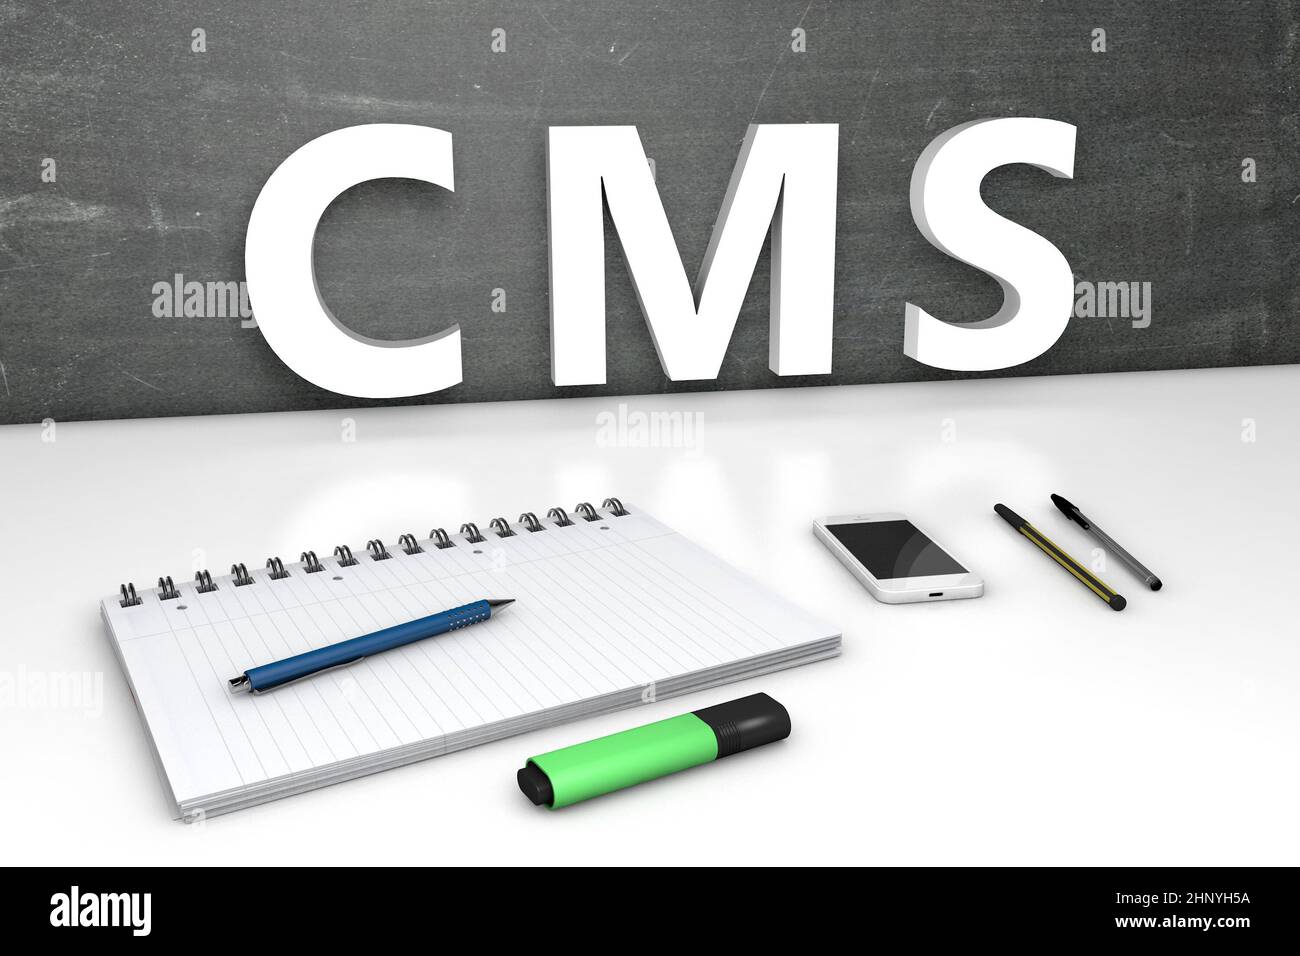 CMS - Content Management System - text concept with chalkboard, notebook, pens and mobile phone. 3D render illustration. Stock Photo